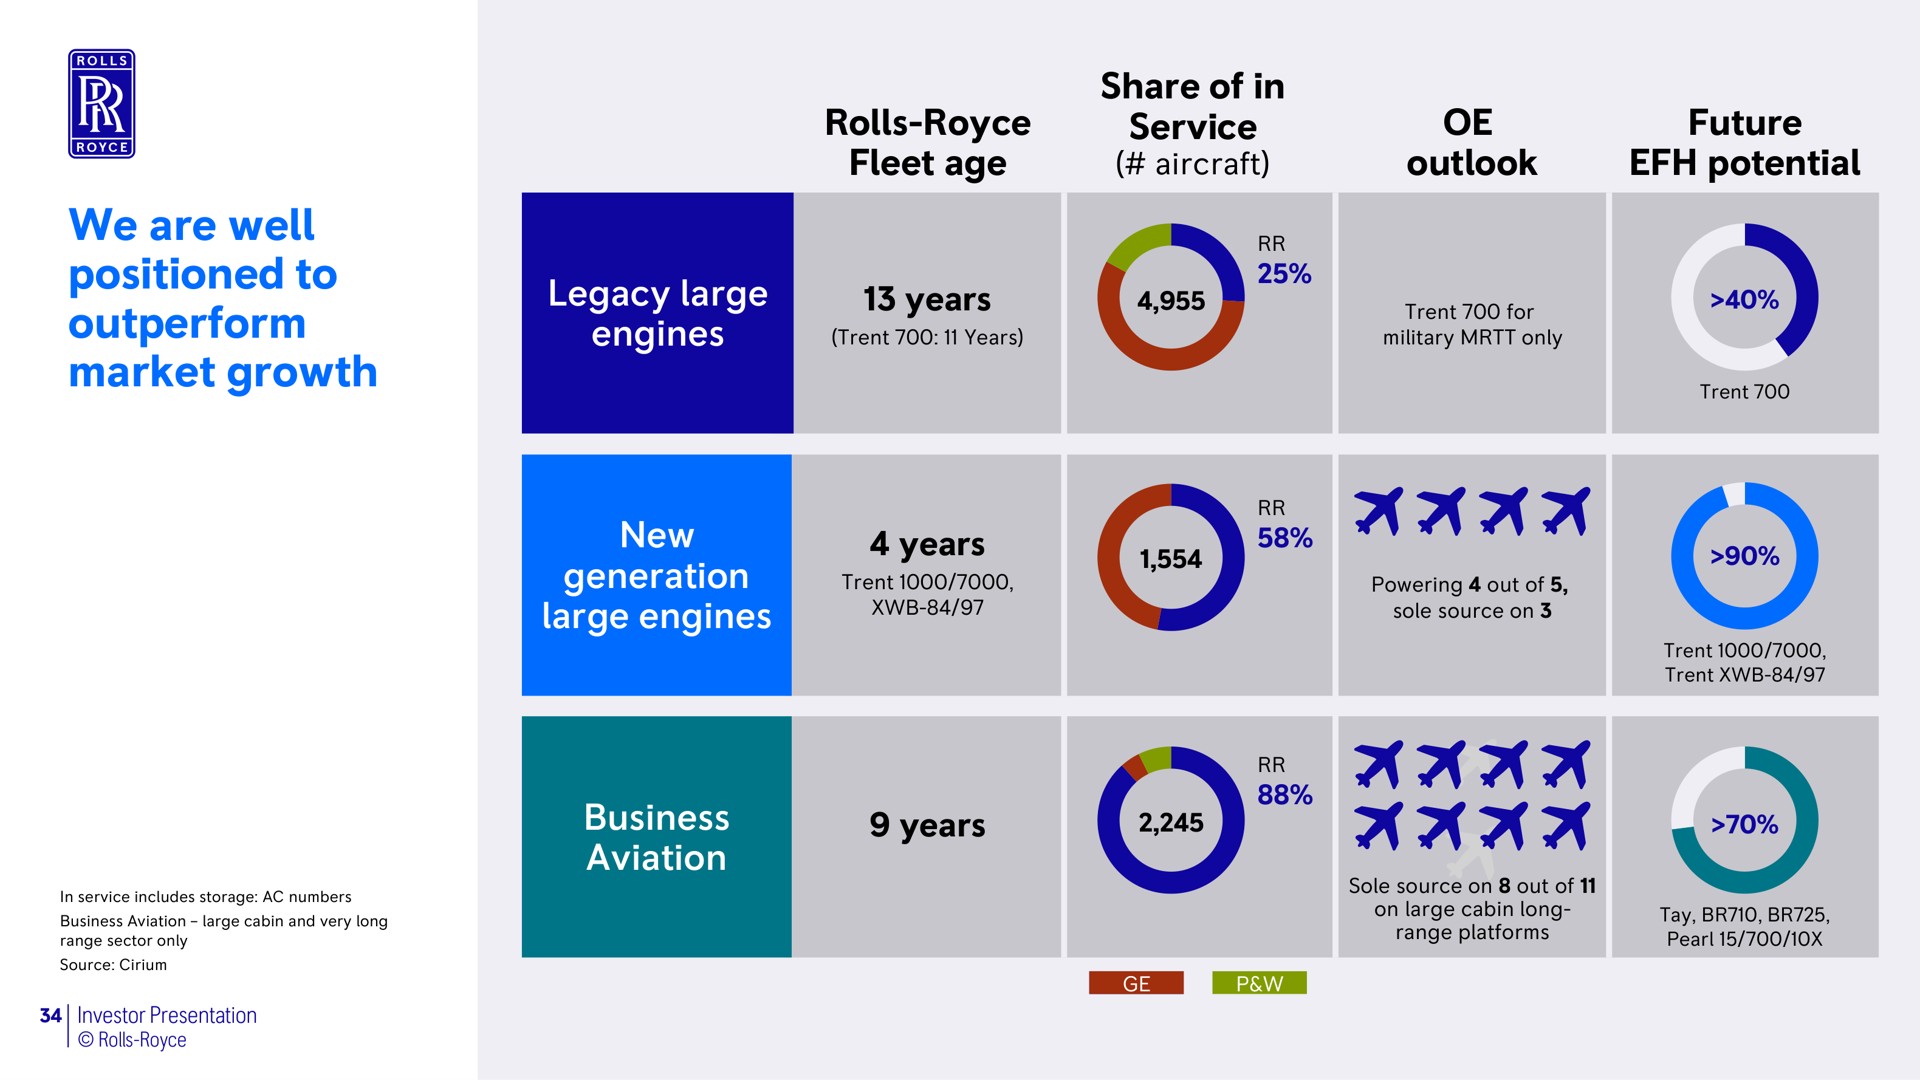 rolls fleet age share of in service outlook future potential we are well positioned to outperform market growth legacy large engines years new generation large engines years business aviation years aircraft me | Rolls-Royce Holdings